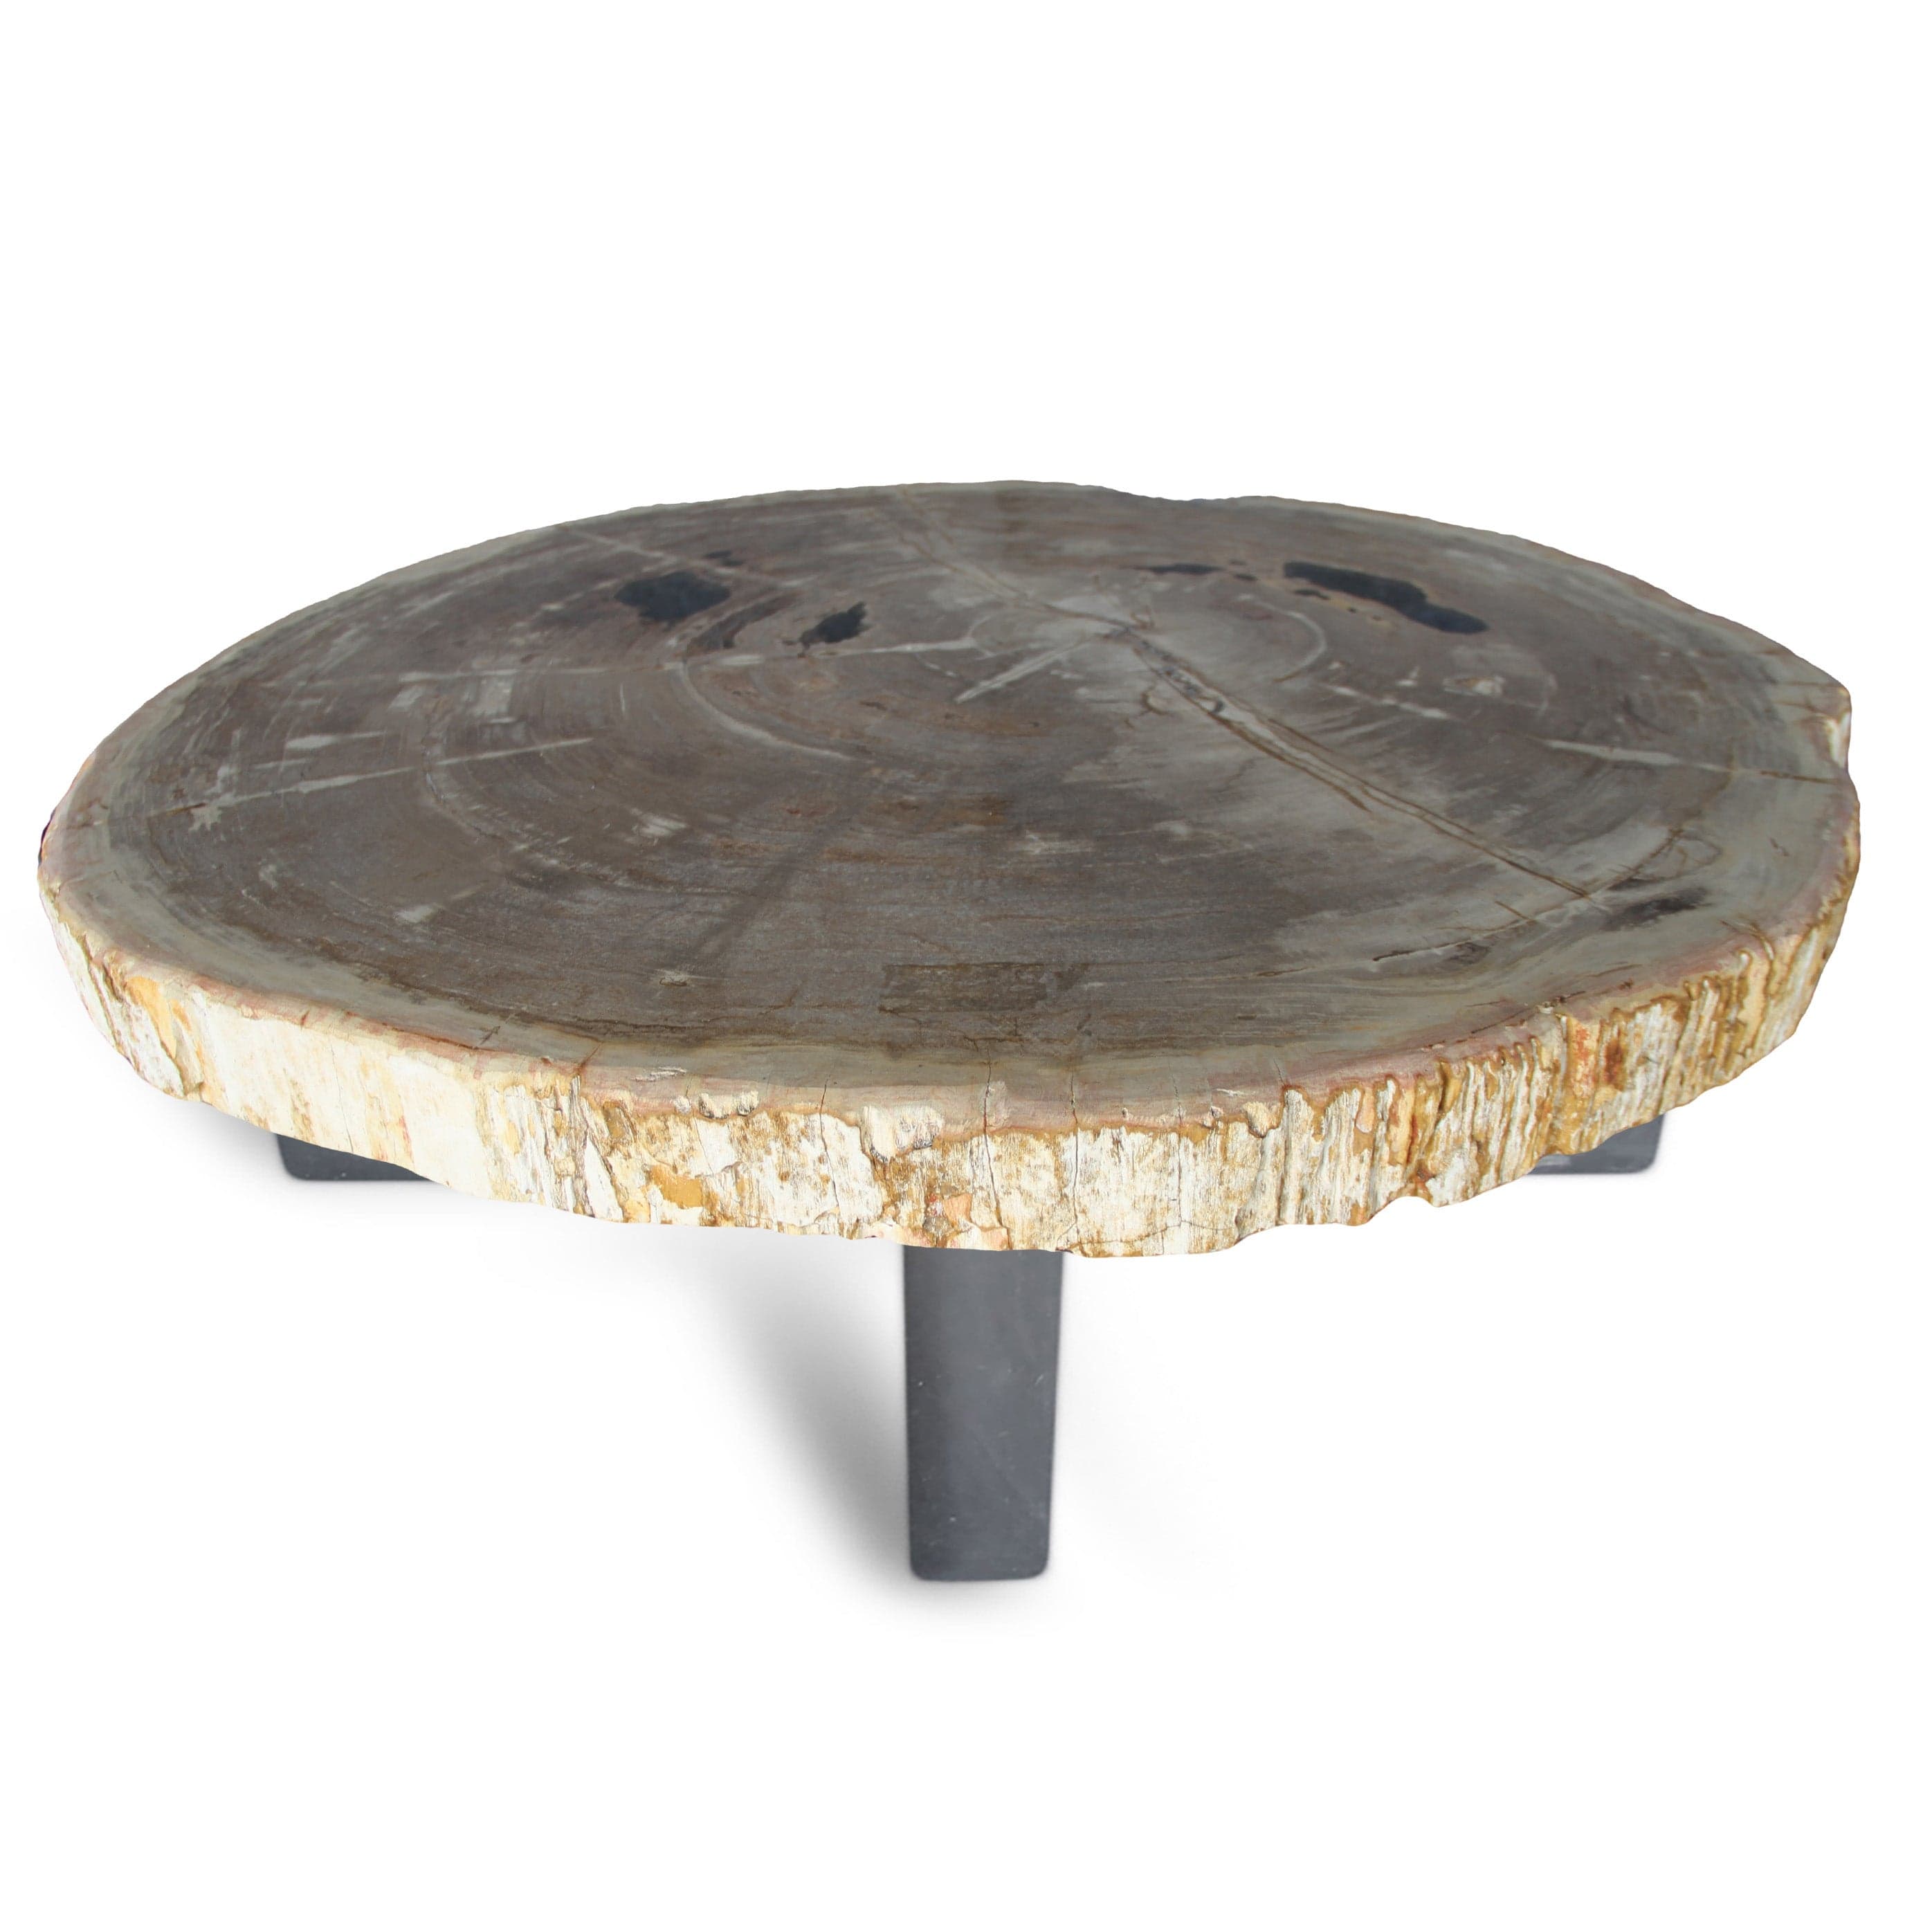 Kalifano Petrified Wood Petrified Wood Round Slab Coffee Table from Indonesia - 39" / 264 lbs PWT9600.005